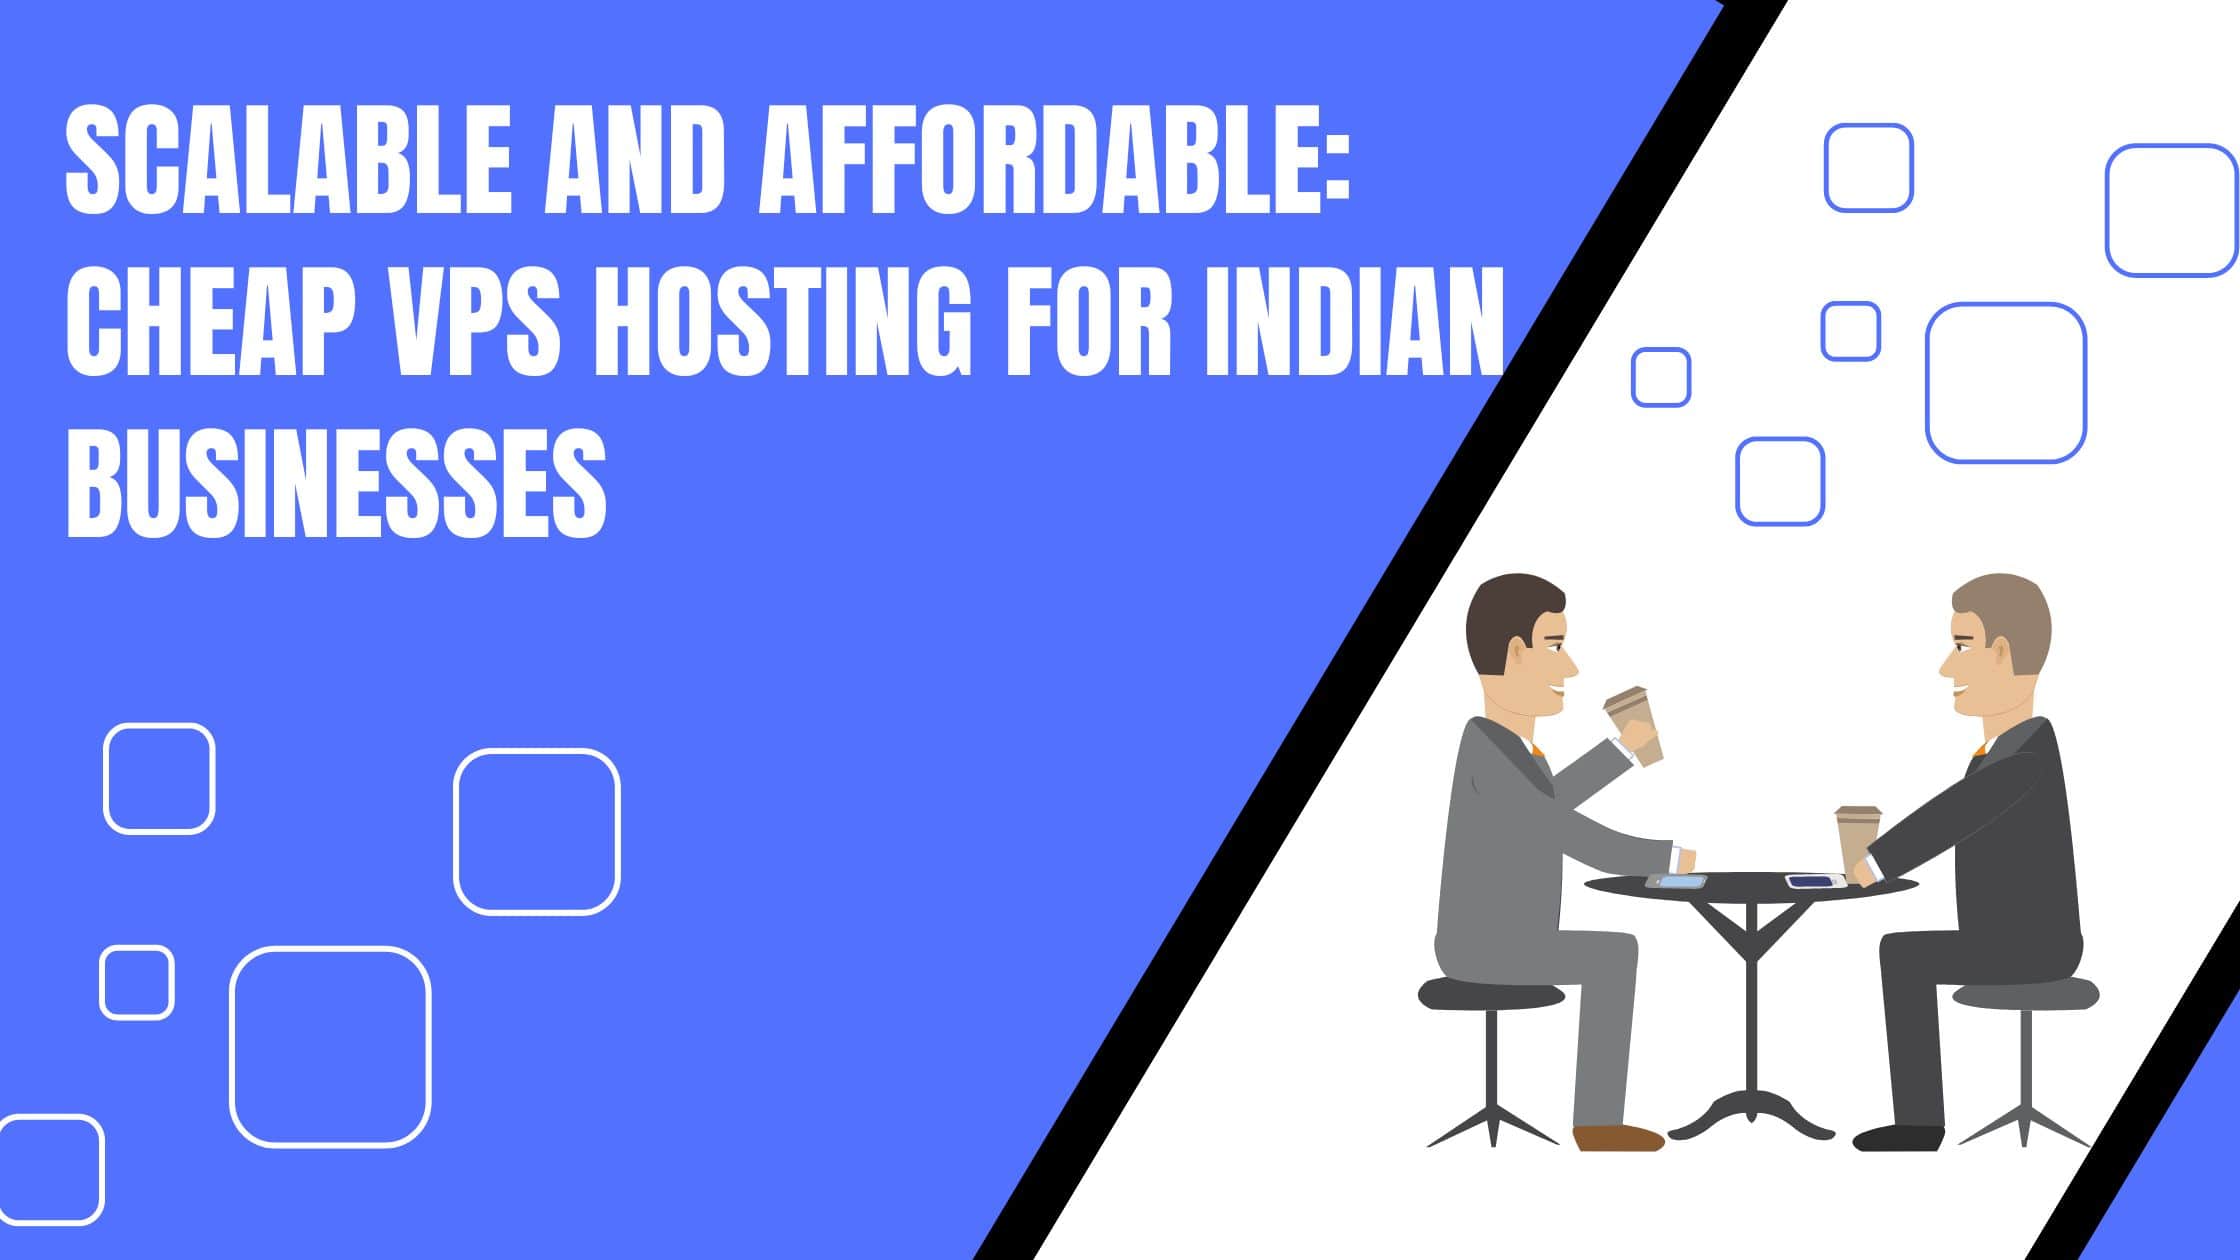 Scalable and affordable VPS Hosting for Indian Businesses